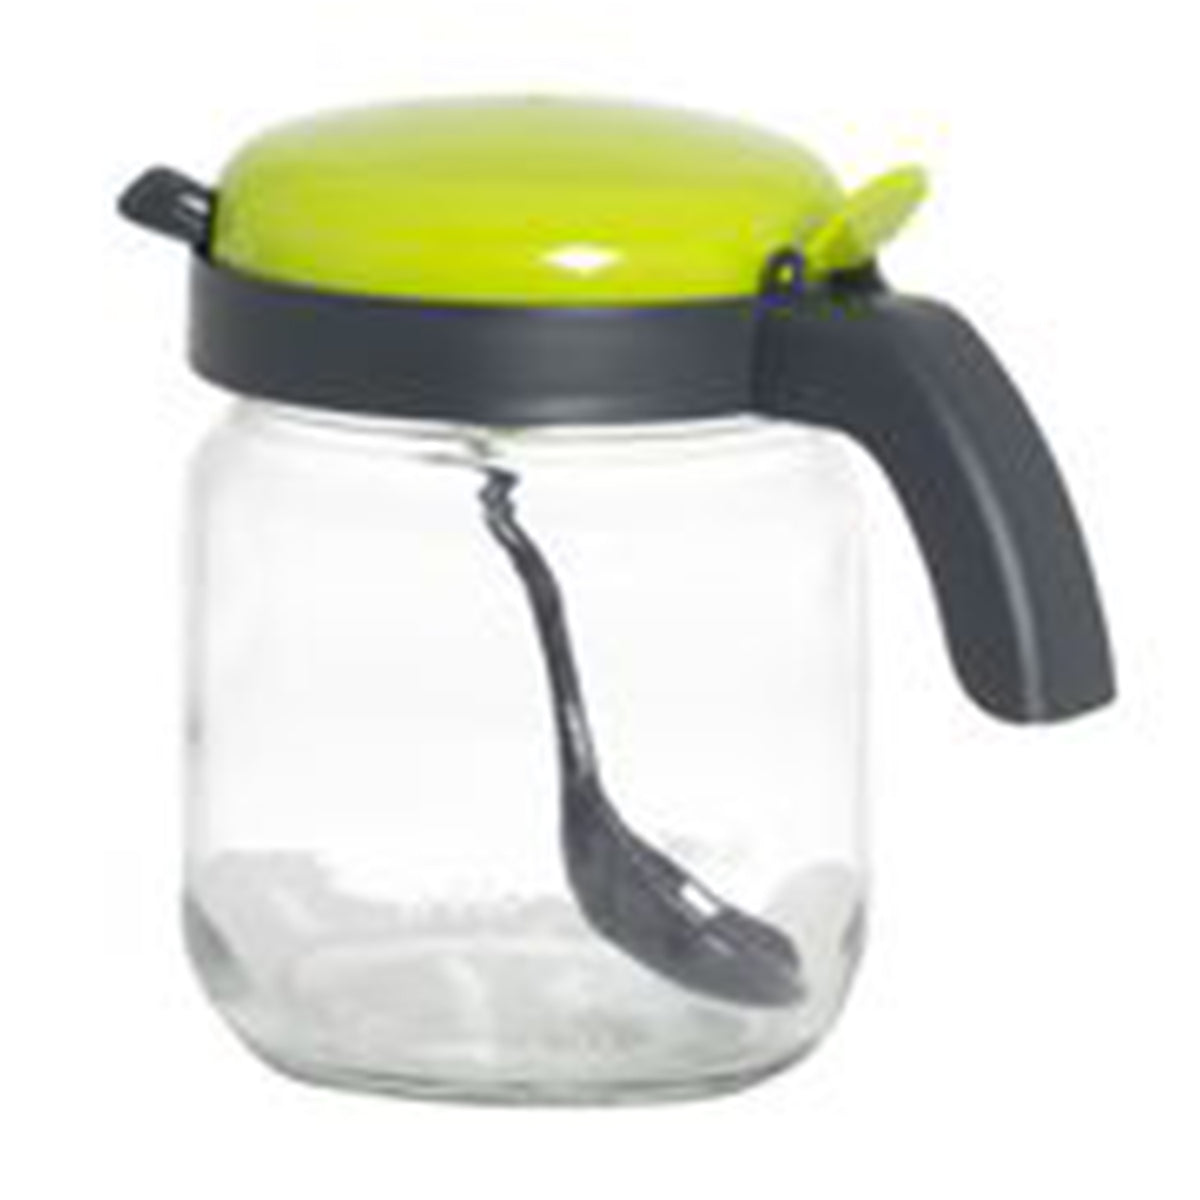 Spice jar set with spoon - Green